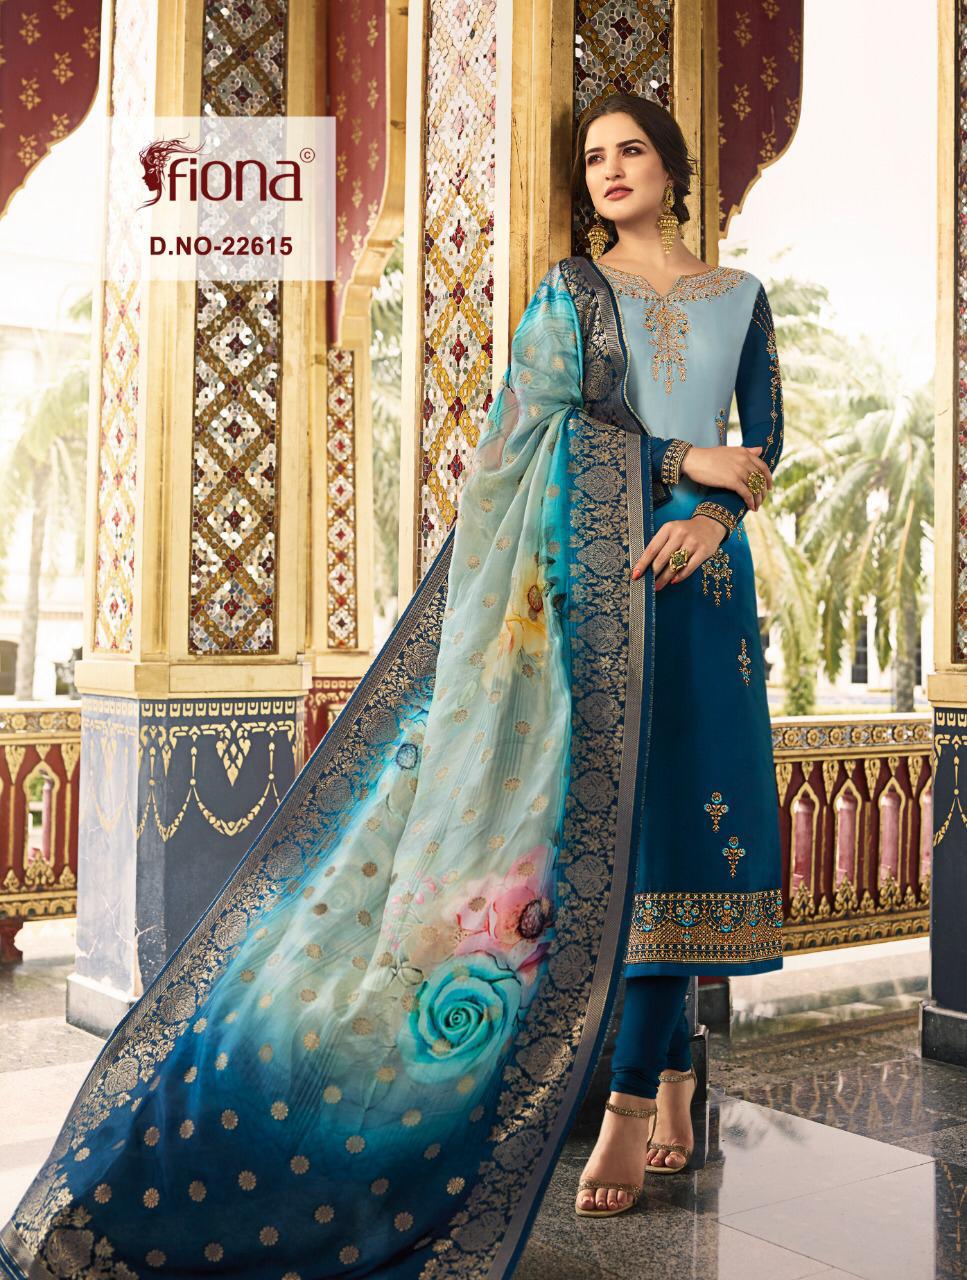 Fiona Presents Nyra Vol-1 Satin Georgette Straight Top With Exclusive Designer Pure Dolla Silk Digital Printed Duppatts Collection